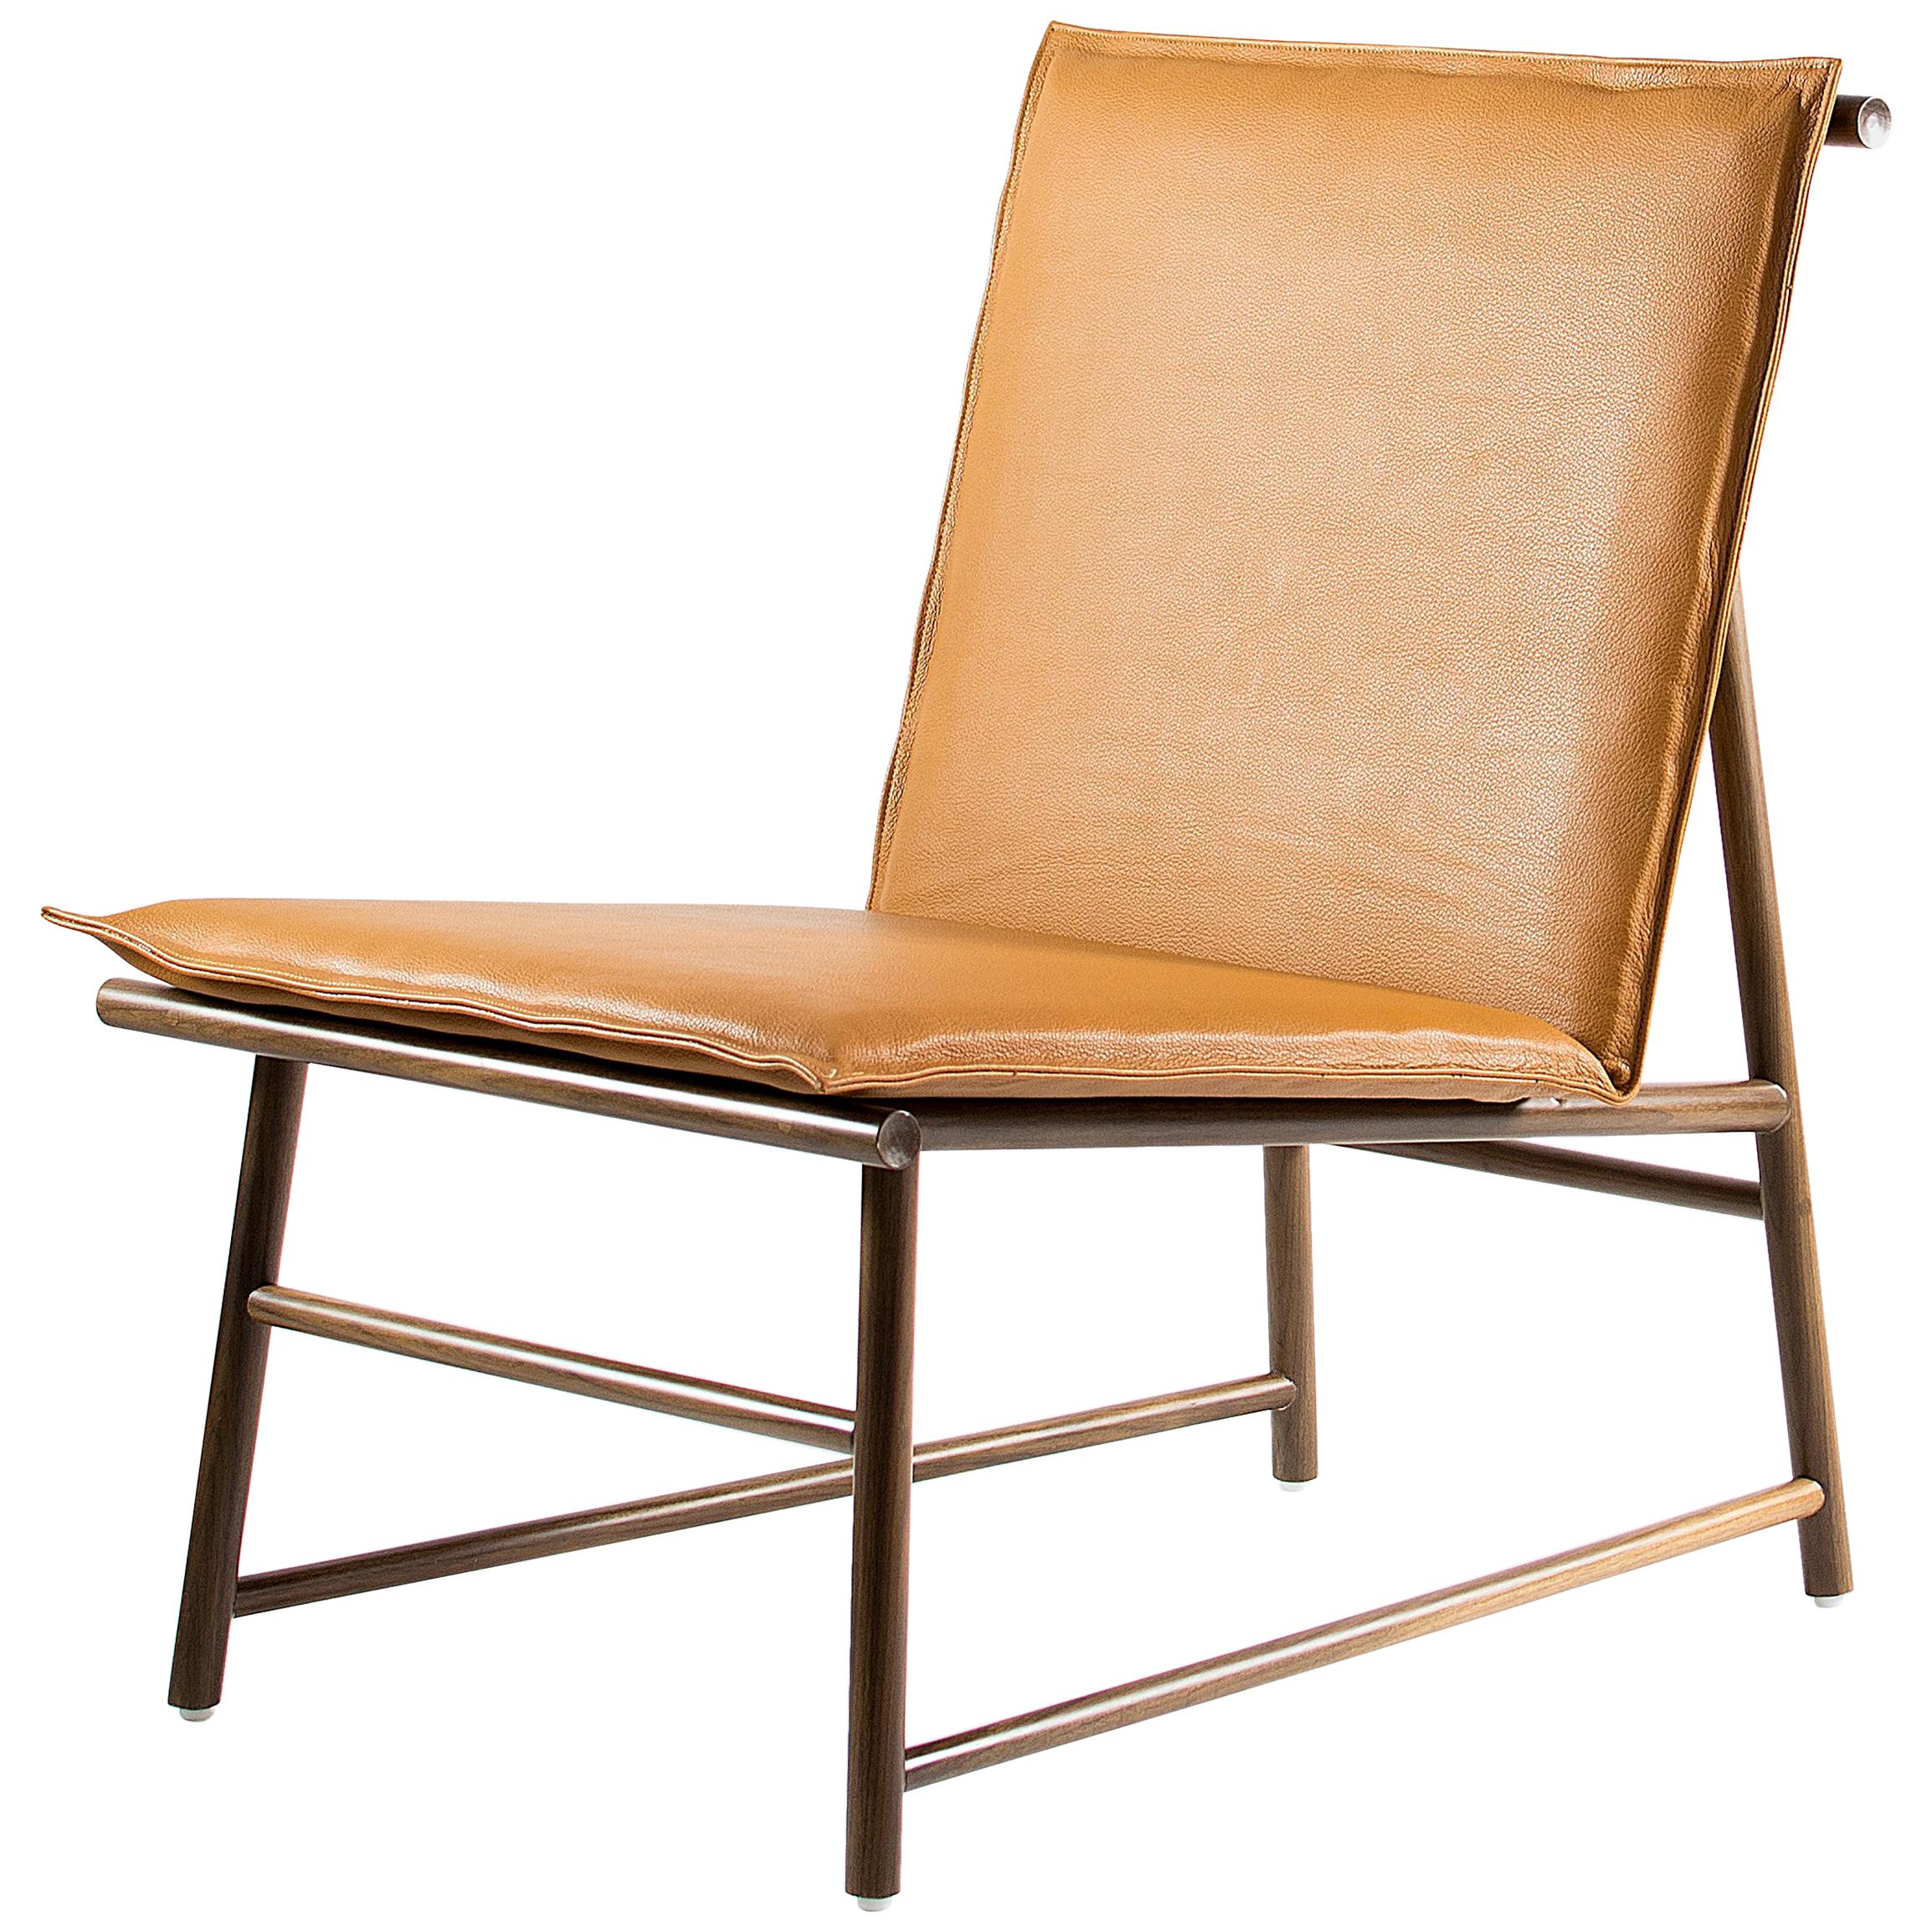 Easy Chair, Lounge Chair in Walnut Wood with Natural Leather Seat